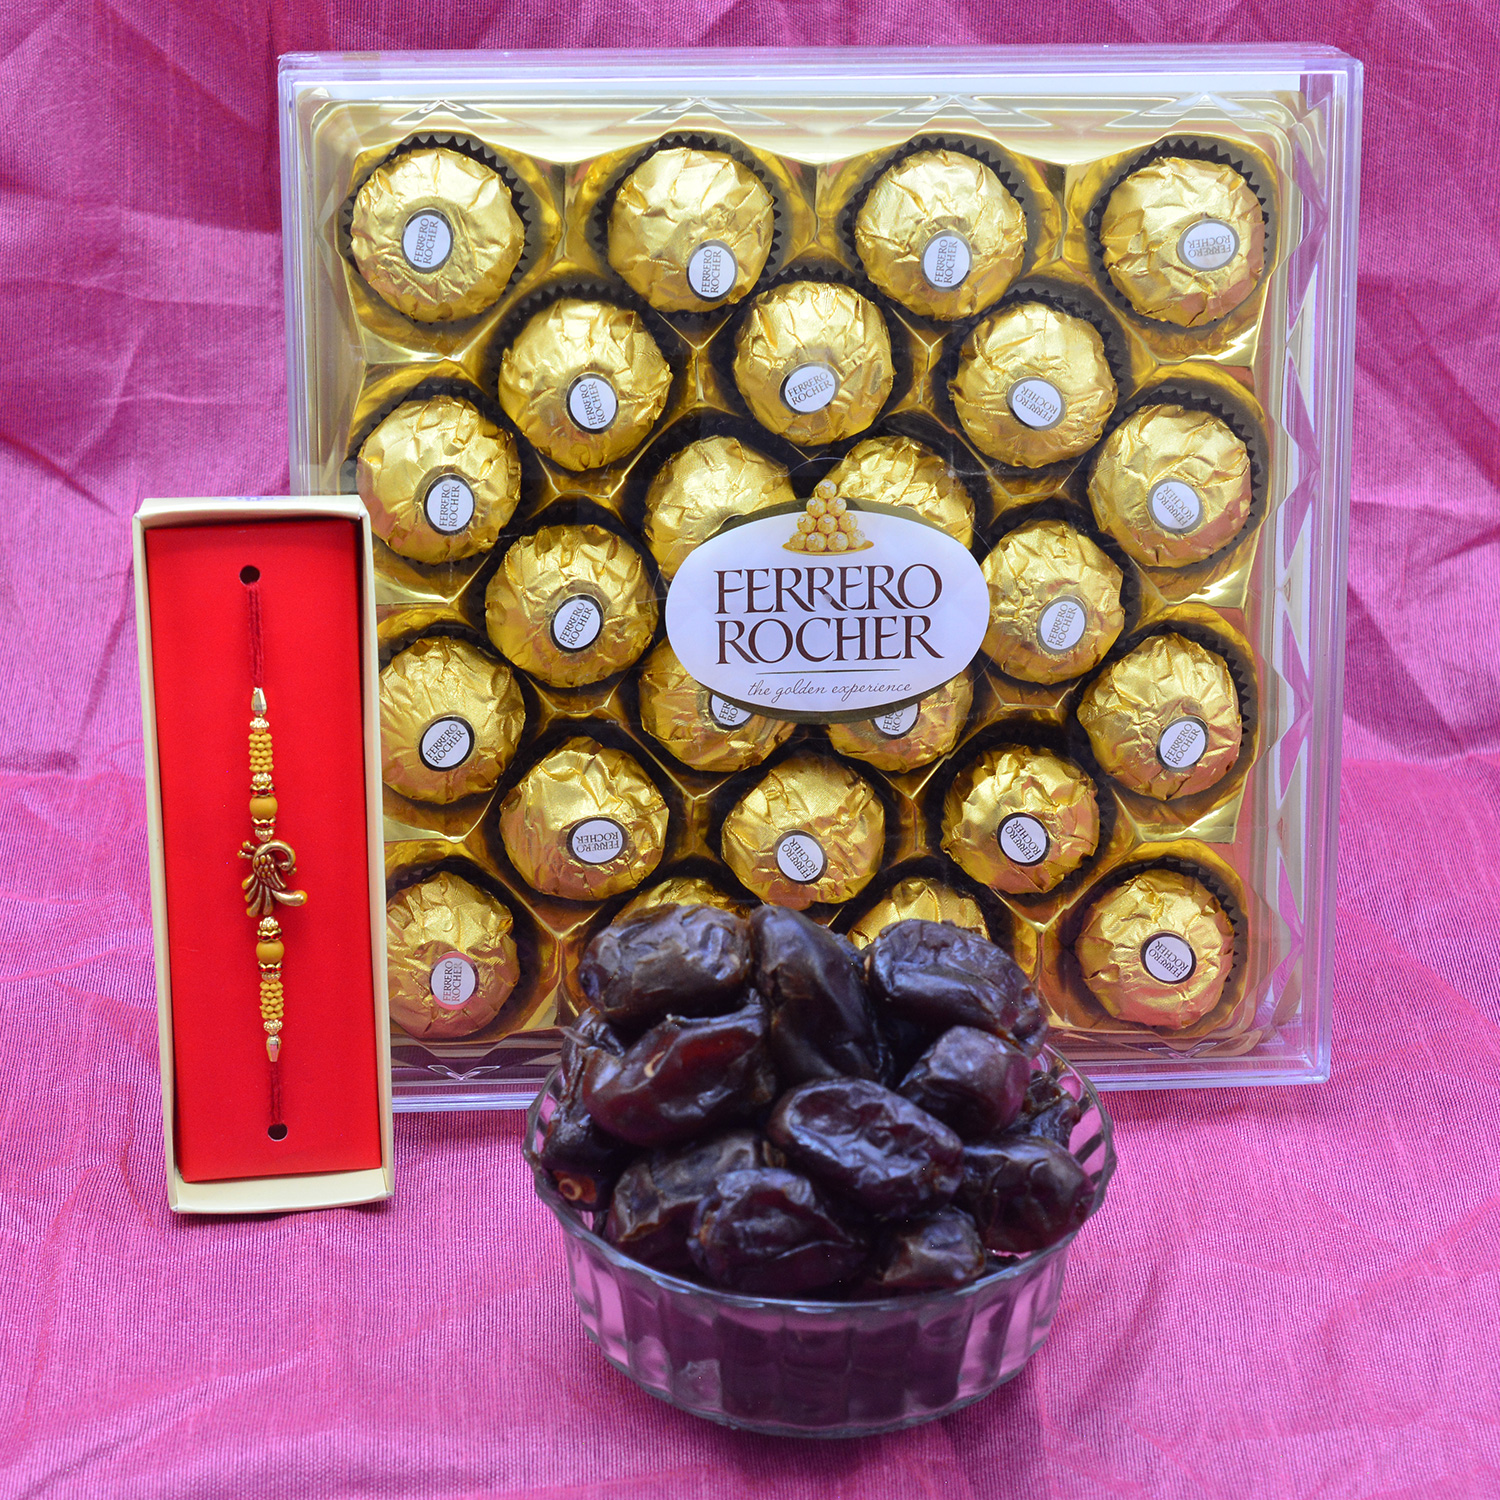 Ferrero Rocher 24 Pc Chocolate with 1 Brother Rakhi and Pind Khajoor or Dates